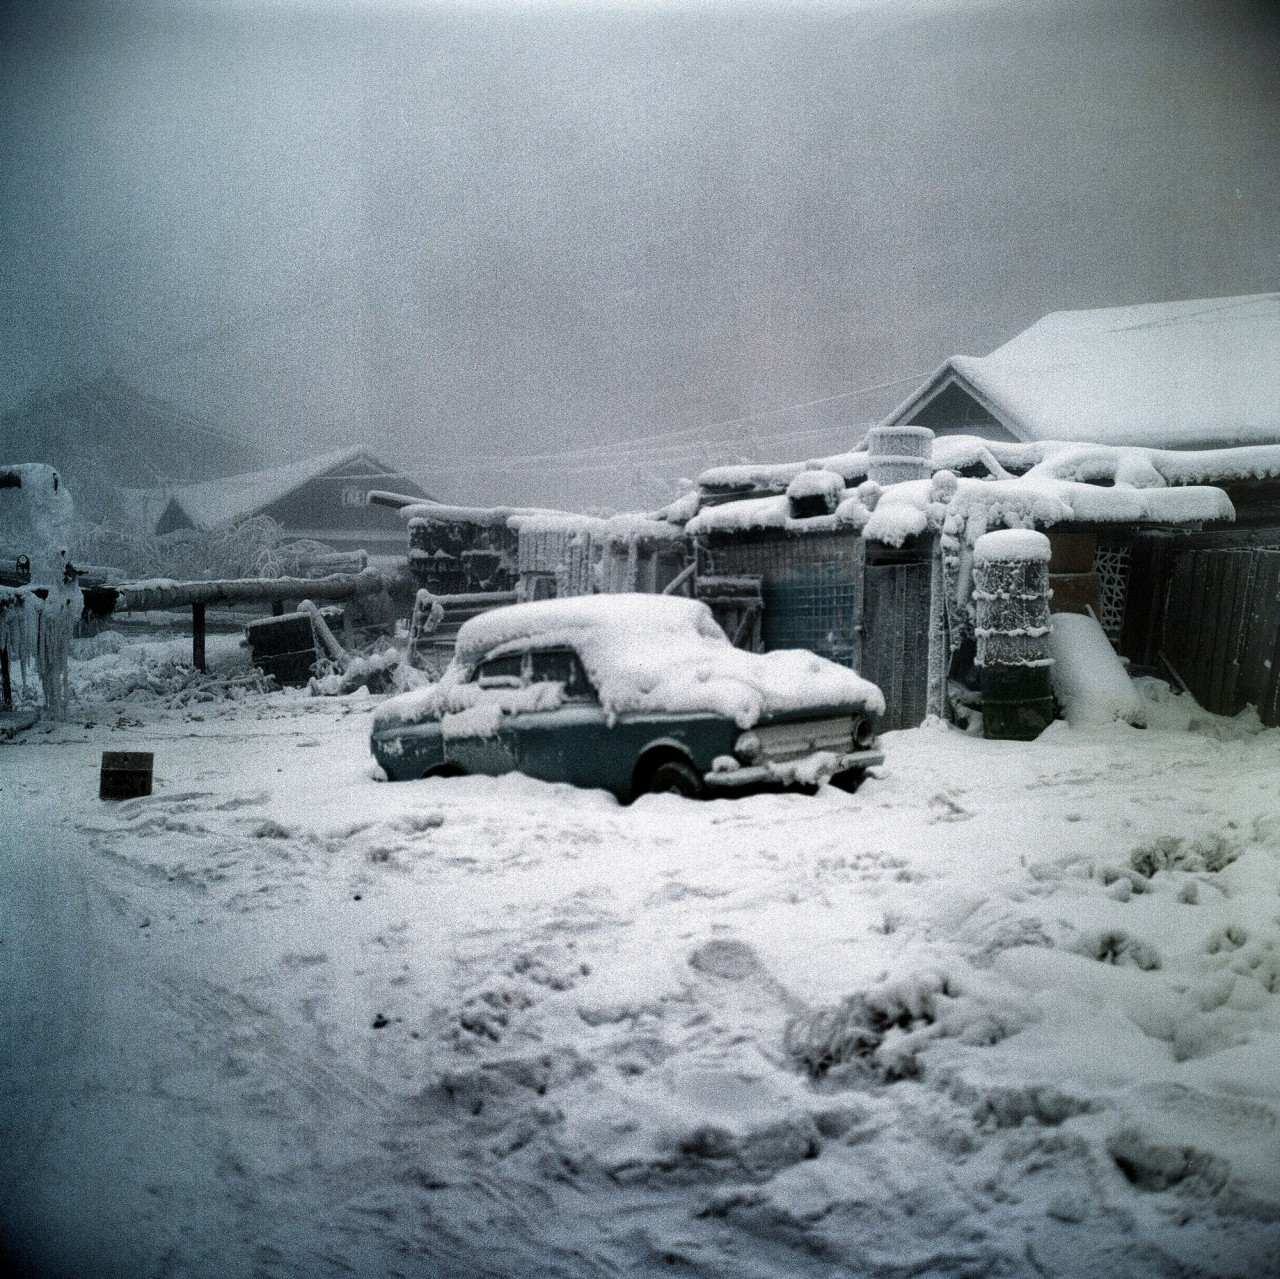 Canada's coldest day and bone-chilling beauty: A frozen tale from the 1947 winter in Snag, Yukon 1